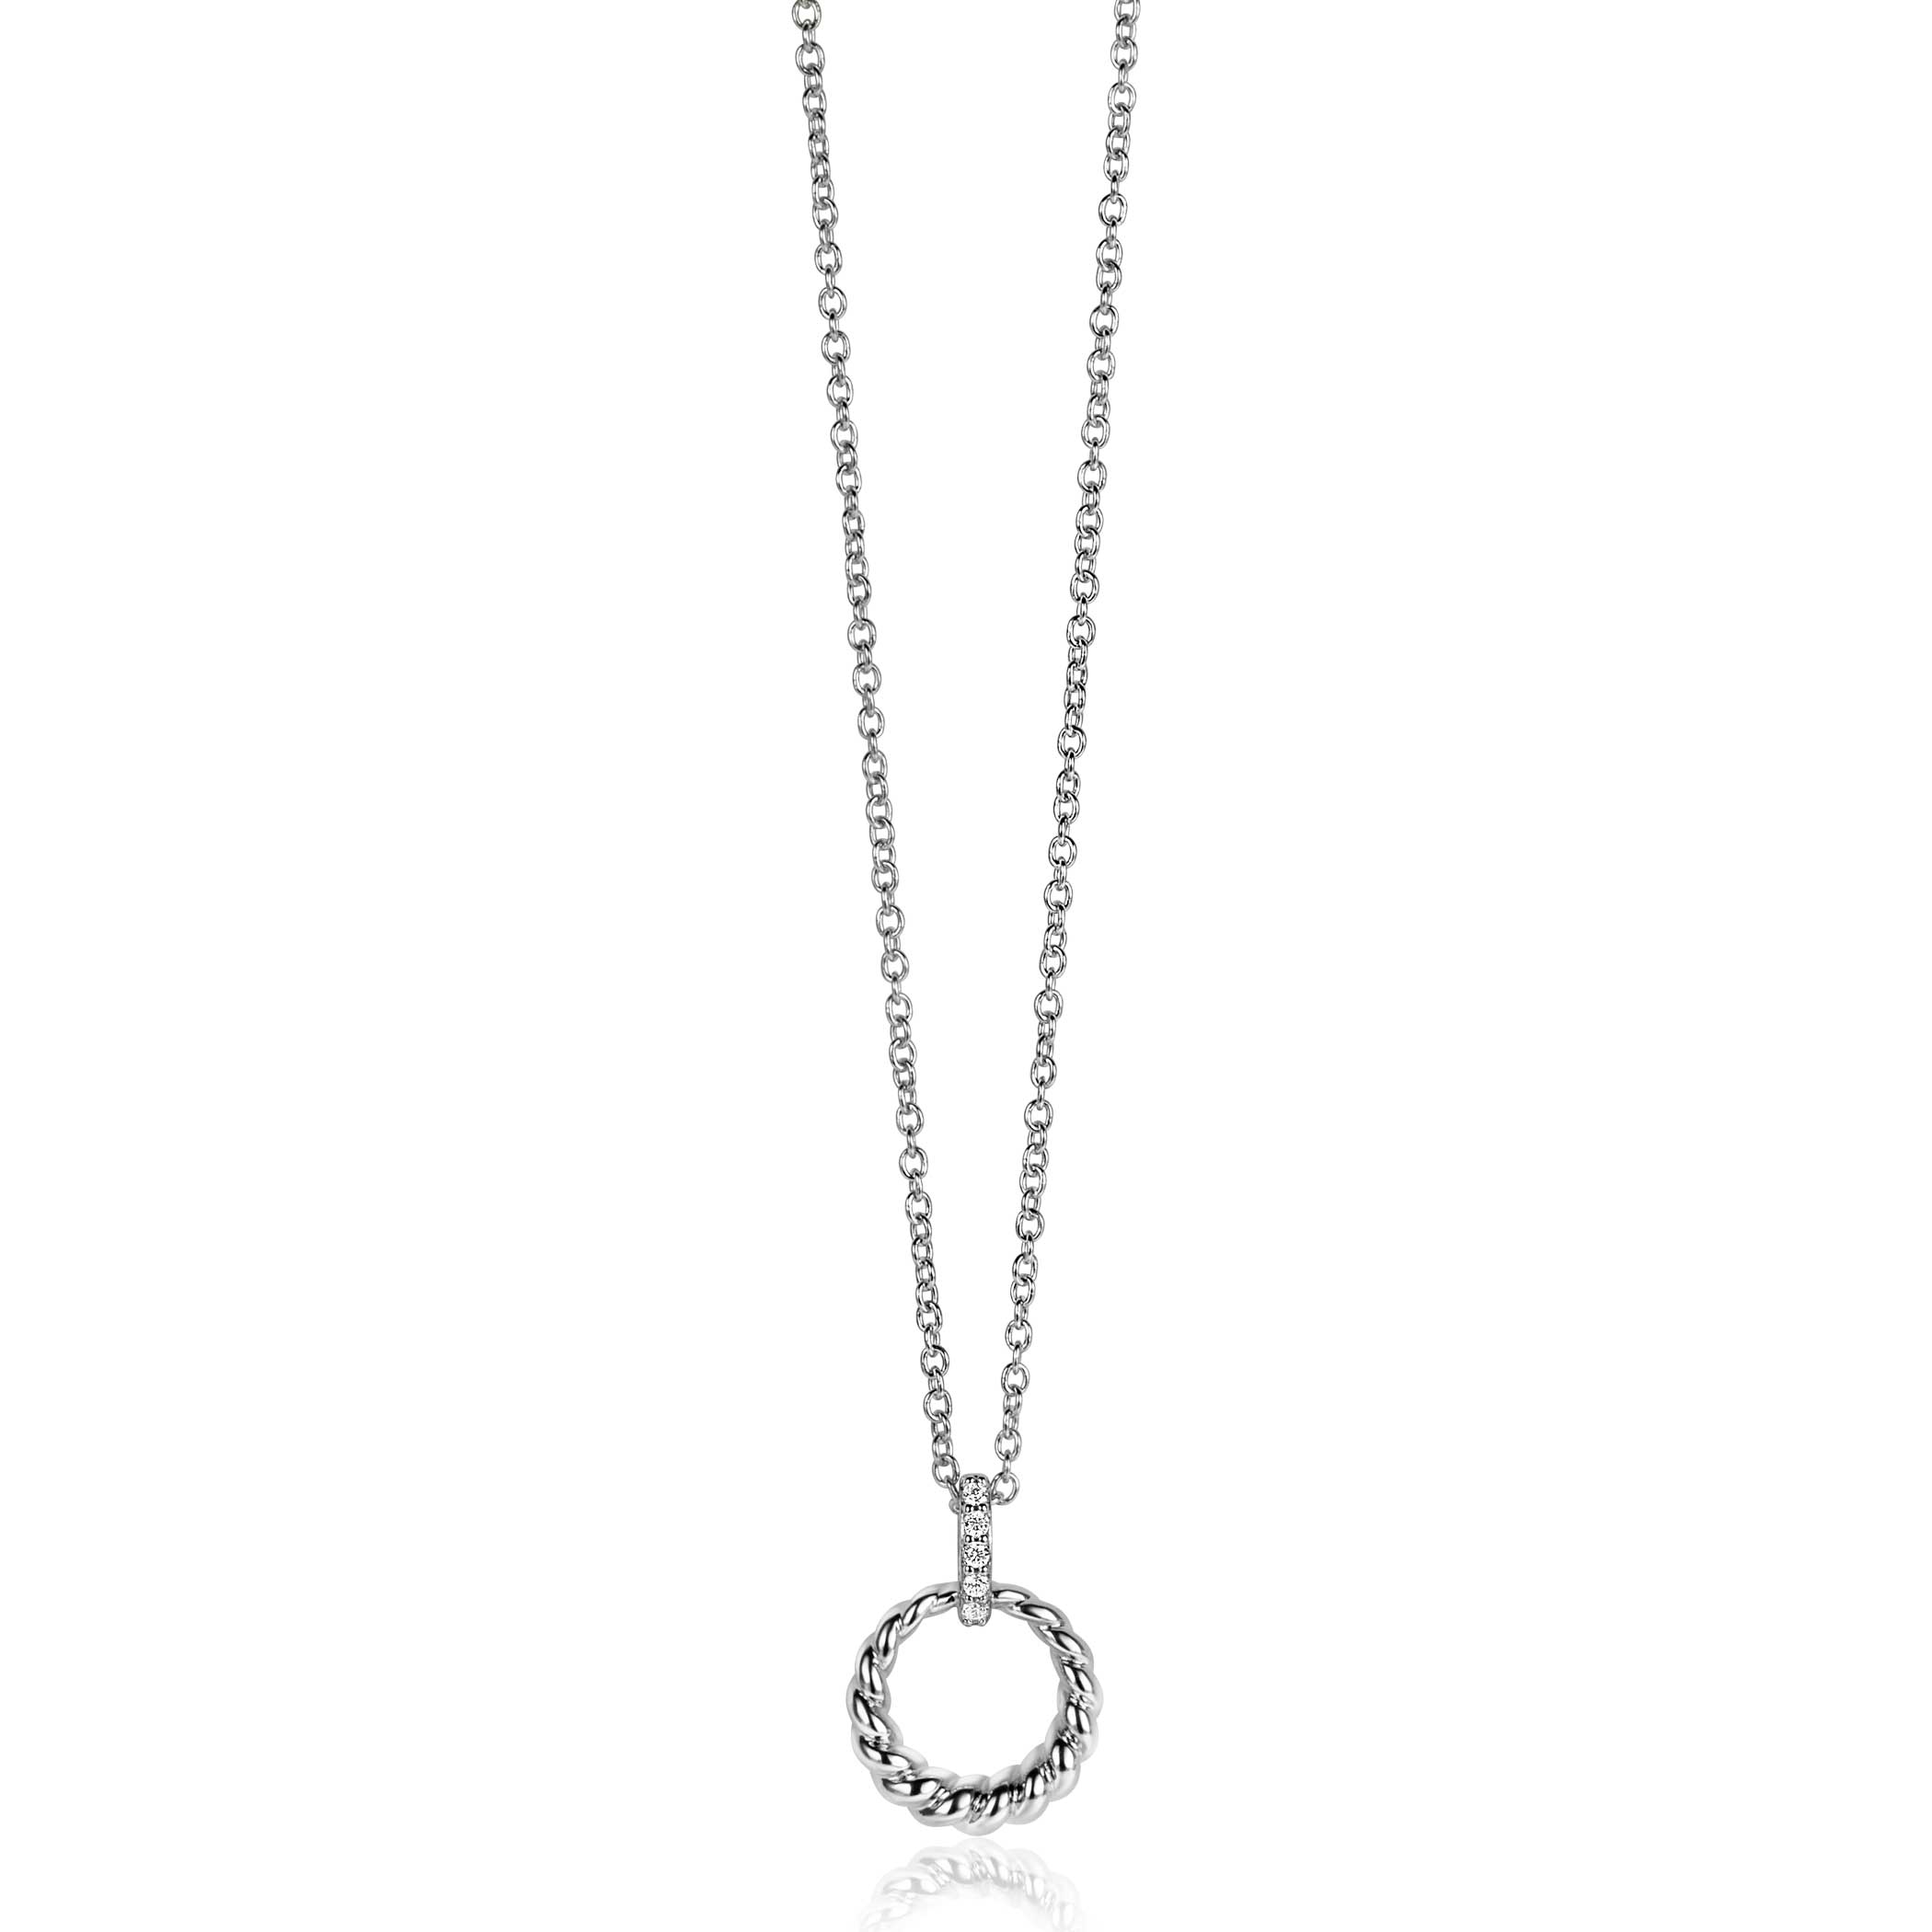 15mm ZINZI Sterling Silver Round Pendant Twist Design Bail Set with White Zirconias ZIH2403 (excl. necklace)